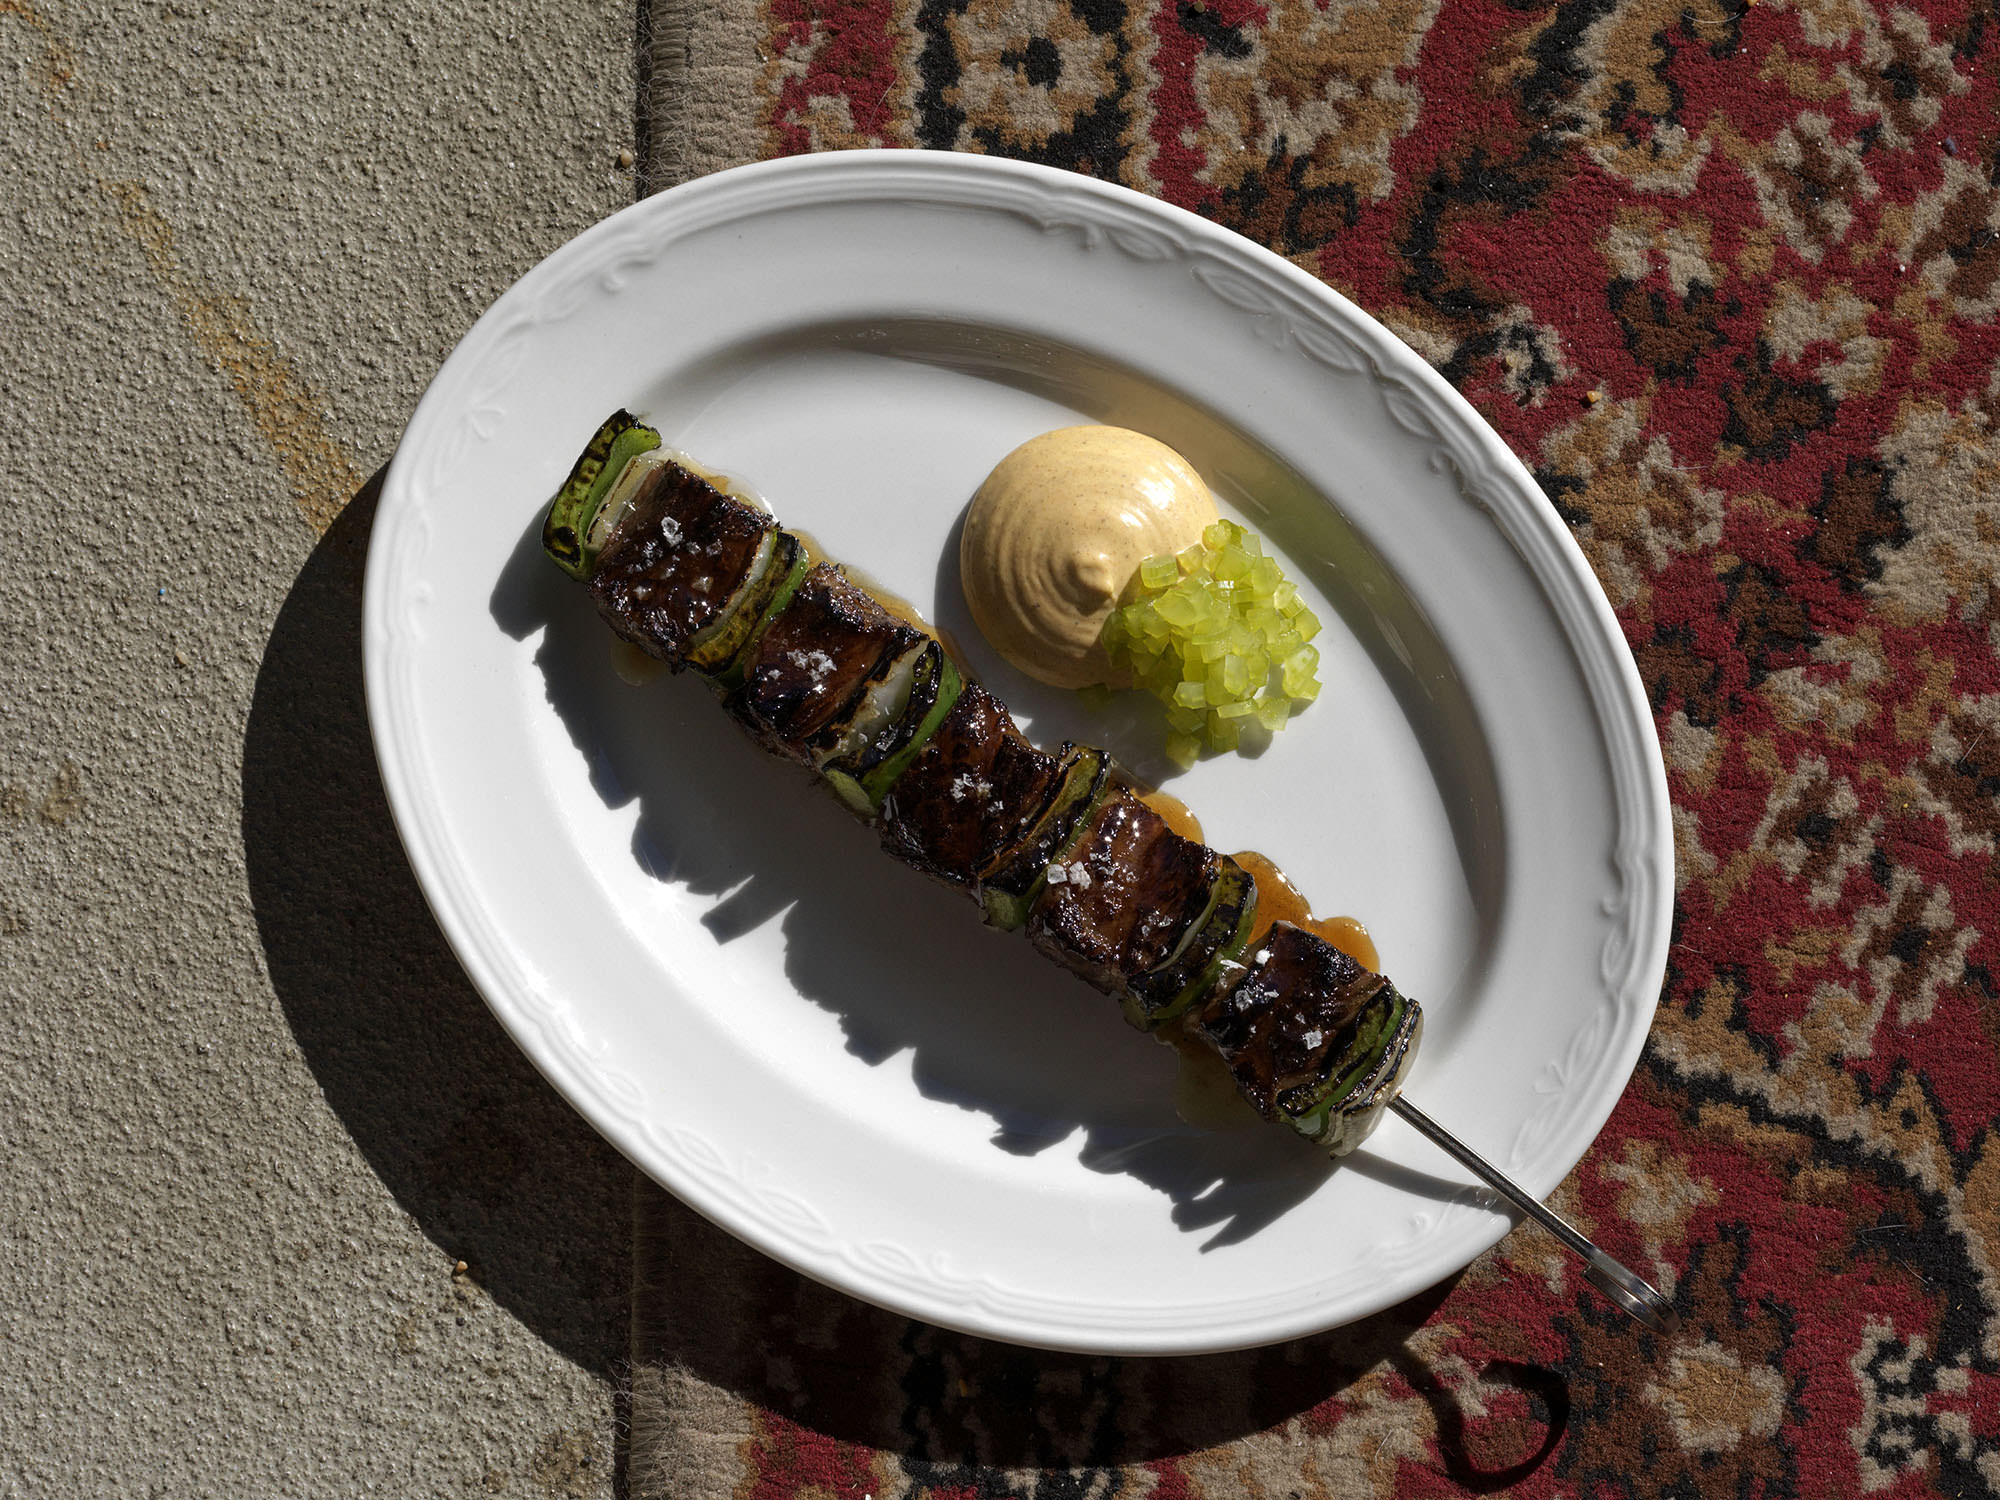 Beef Kebab but make it 9+ full blood wagyu – intercostals are braised for 1.5 hours then skewered and cooked over coals. Served with egg yolk sauce – a hot yolk emulsion with vinegar made from burnt mandarin and saffron, burnt butter and ras el hanout – and celery compressed in the vinegar 4-5 times.